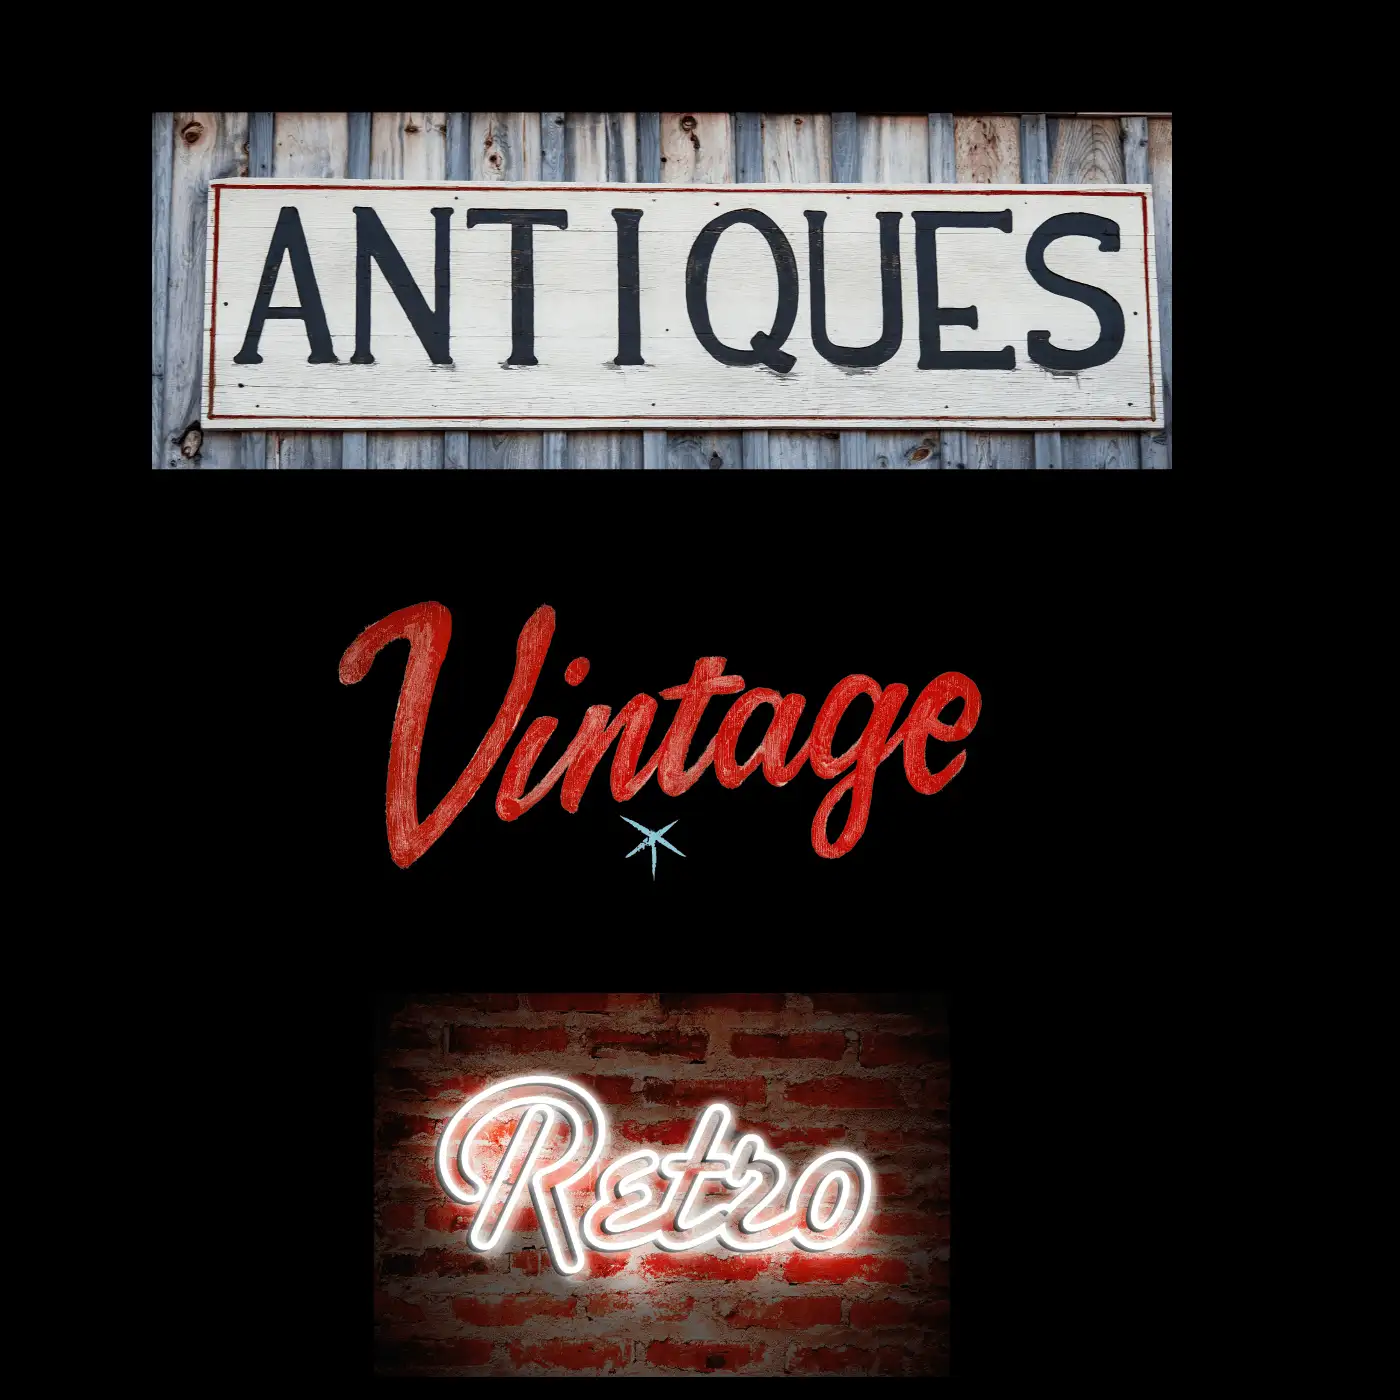 You are currently viewing Antiques, Vintage, and Retro: How old is old?